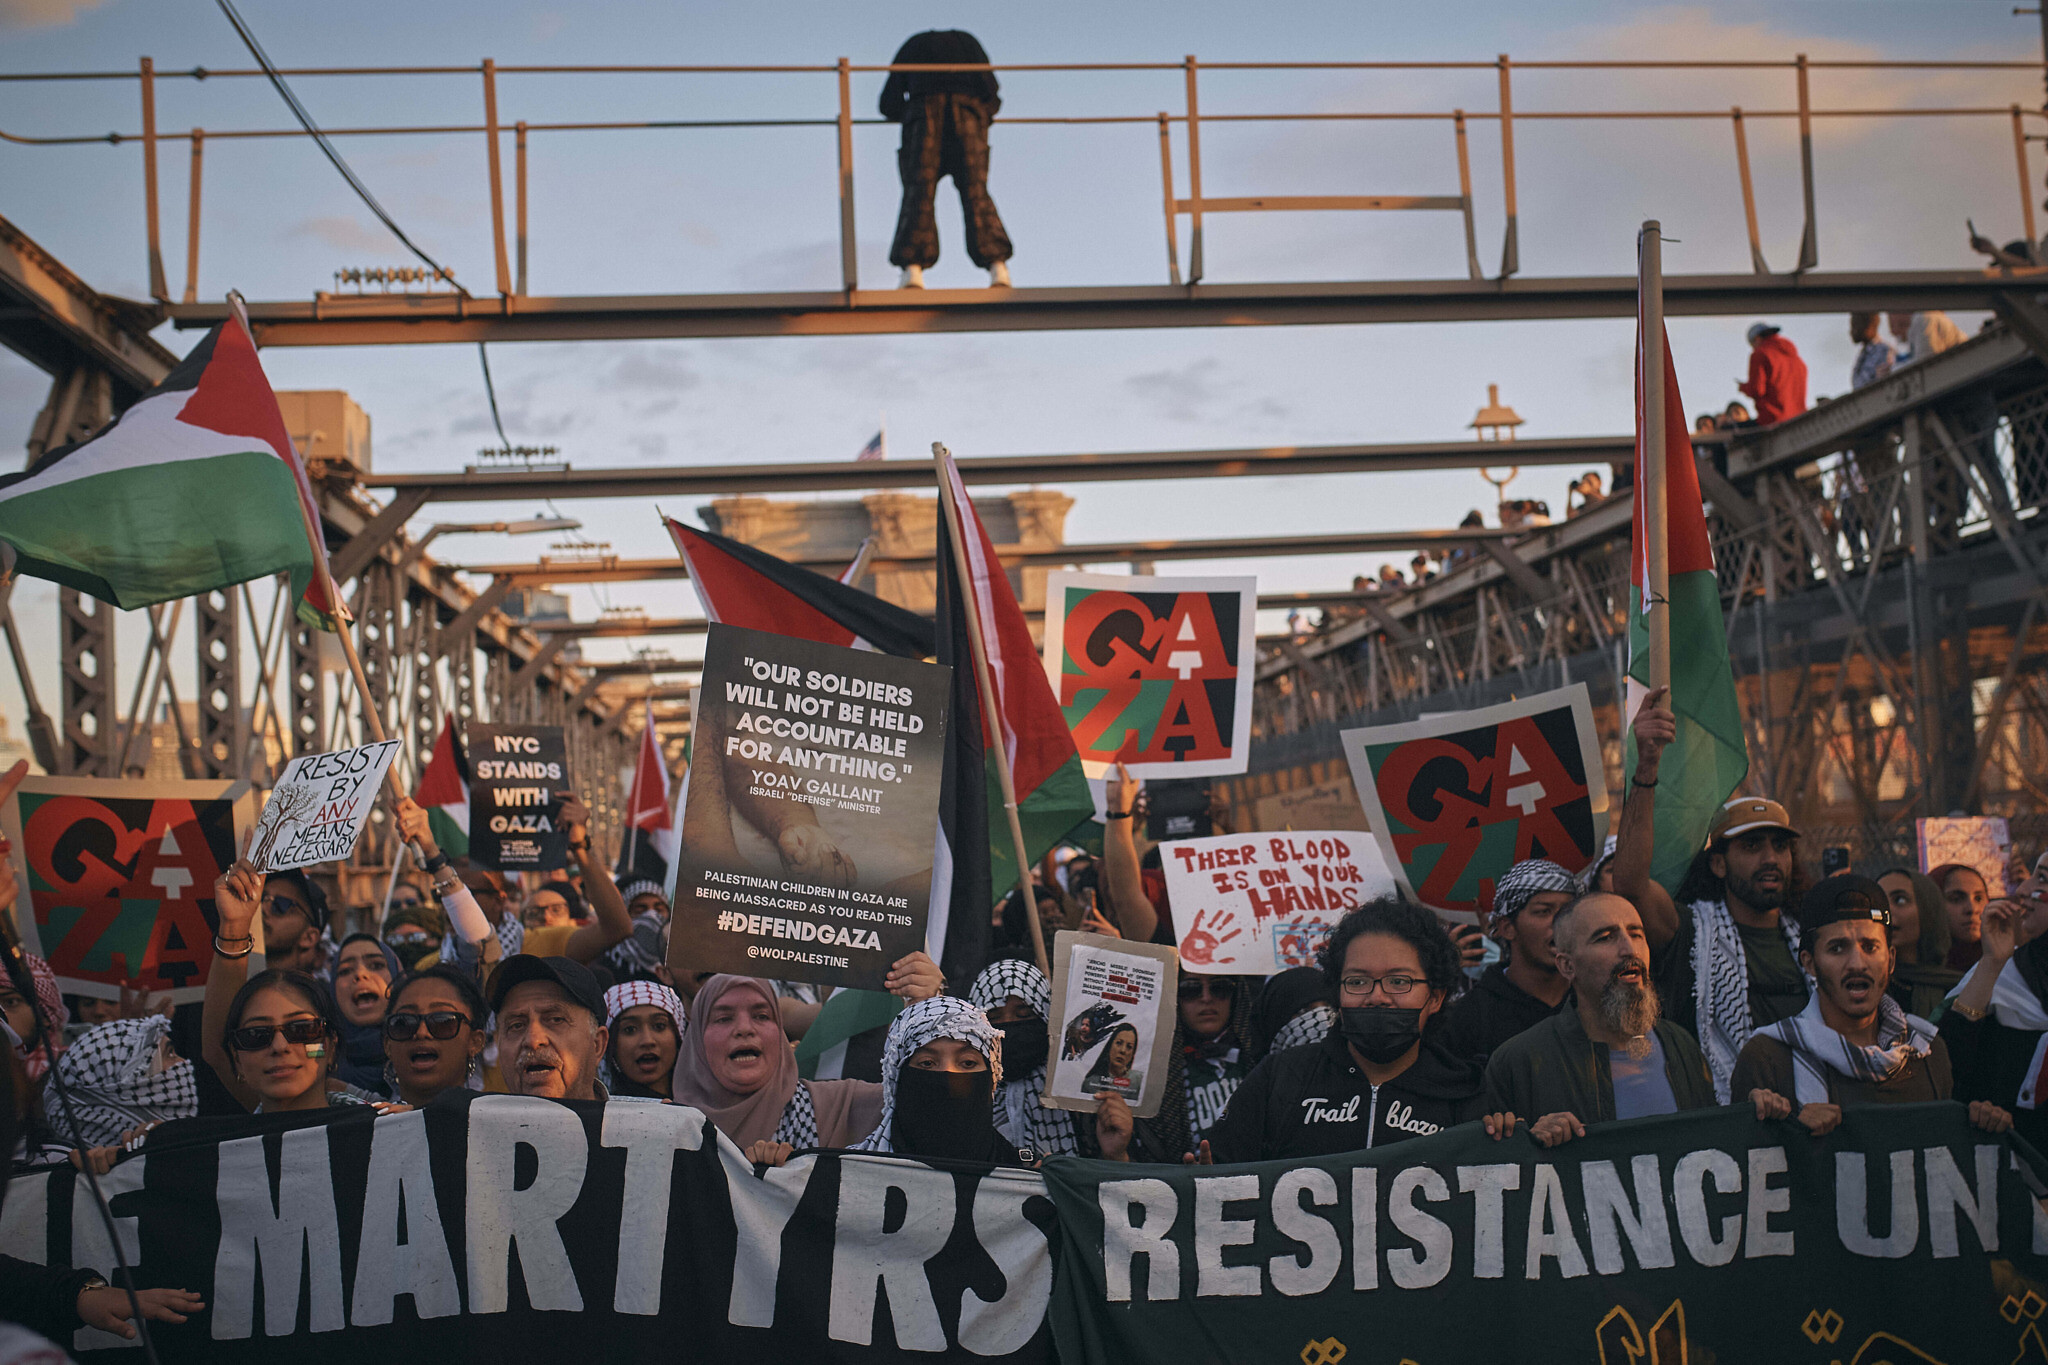 Palestinian resistance's latest message to the world